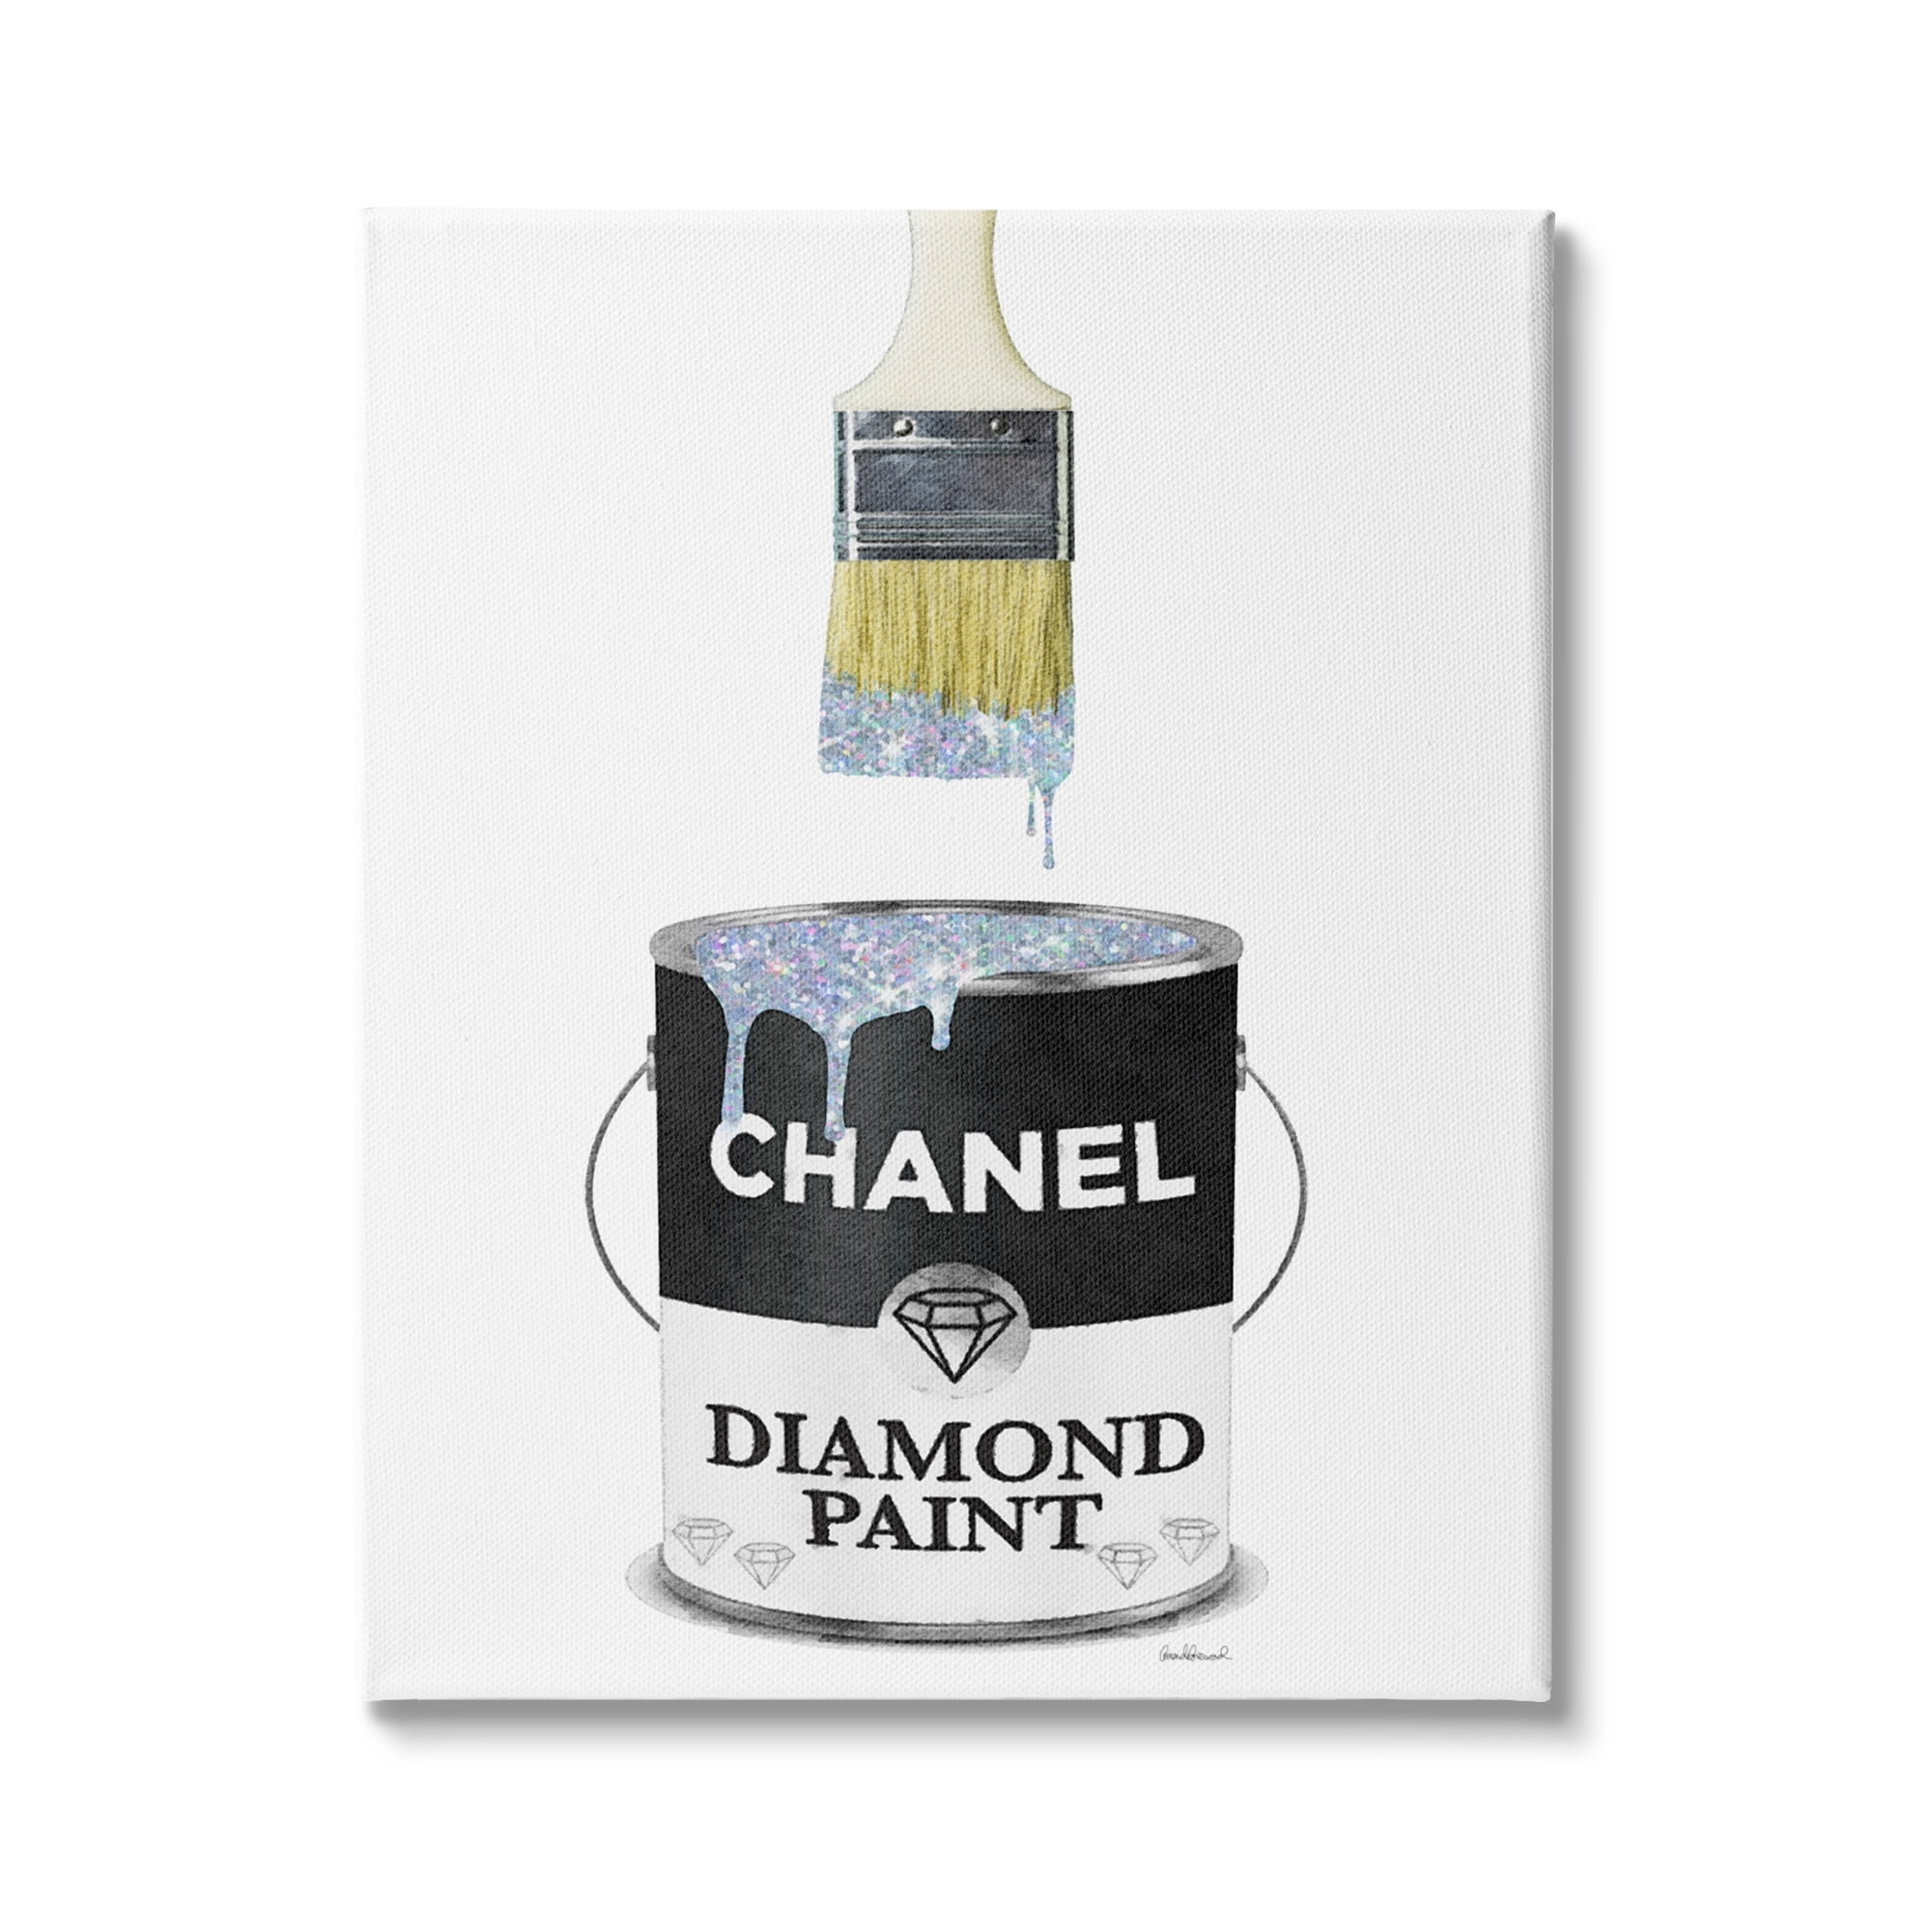 Glam Pop Fashion Diamond Paint Deluxe Designer Black 36 in x 48 in Painting Canvas Art Print, by Stupell Home dcor